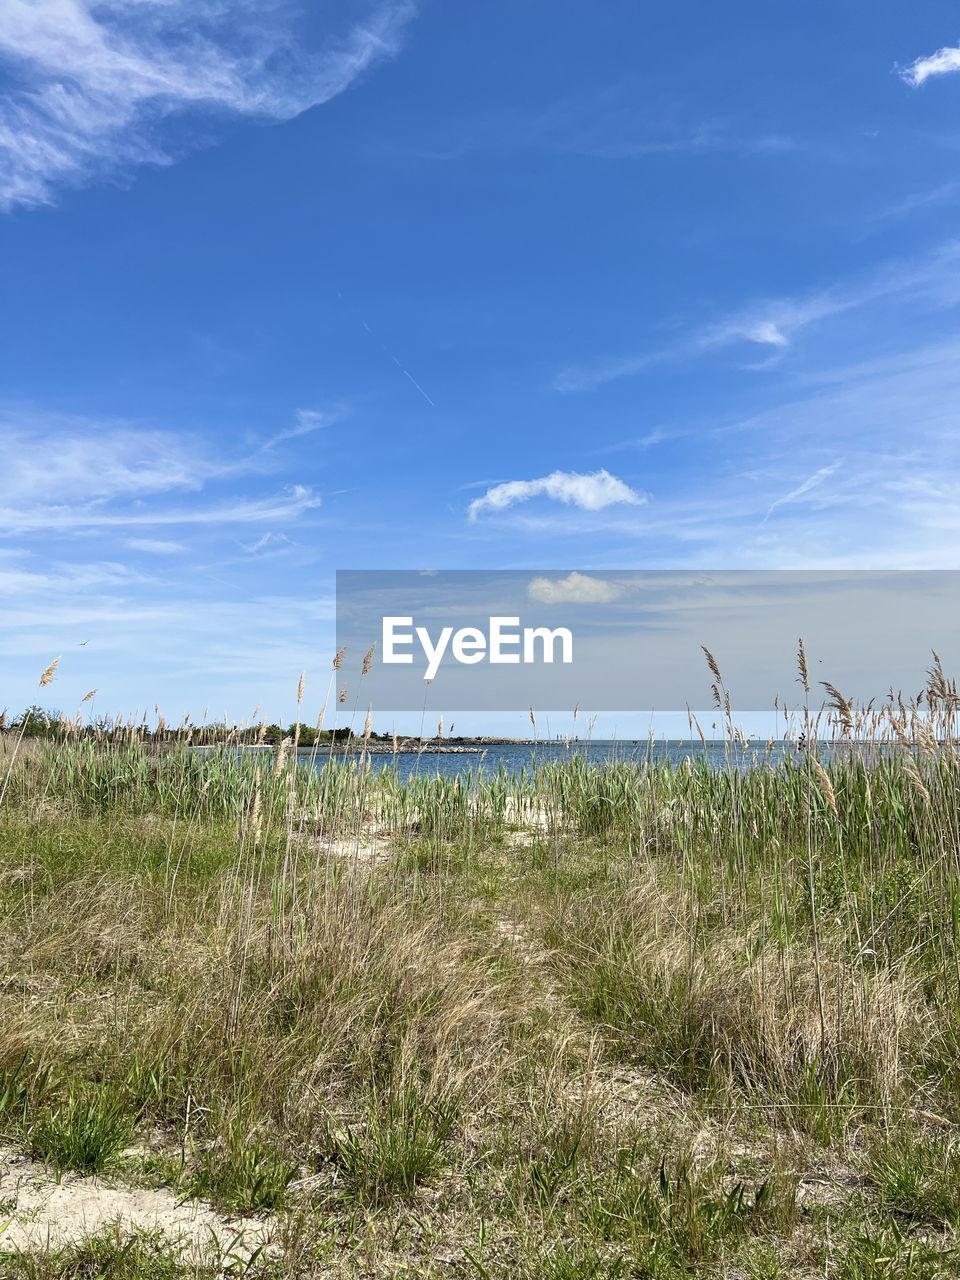 sky, grass, land, natural environment, nature, plant, horizon, environment, landscape, cloud, coast, sea, shore, blue, water, scenics - nature, beauty in nature, wetland, tranquility, no people, marsh, prairie, beach, tranquil scene, day, grassland, outdoors, field, growth, non-urban scene, marram grass, sand, travel, rural area, horizon over water, wind